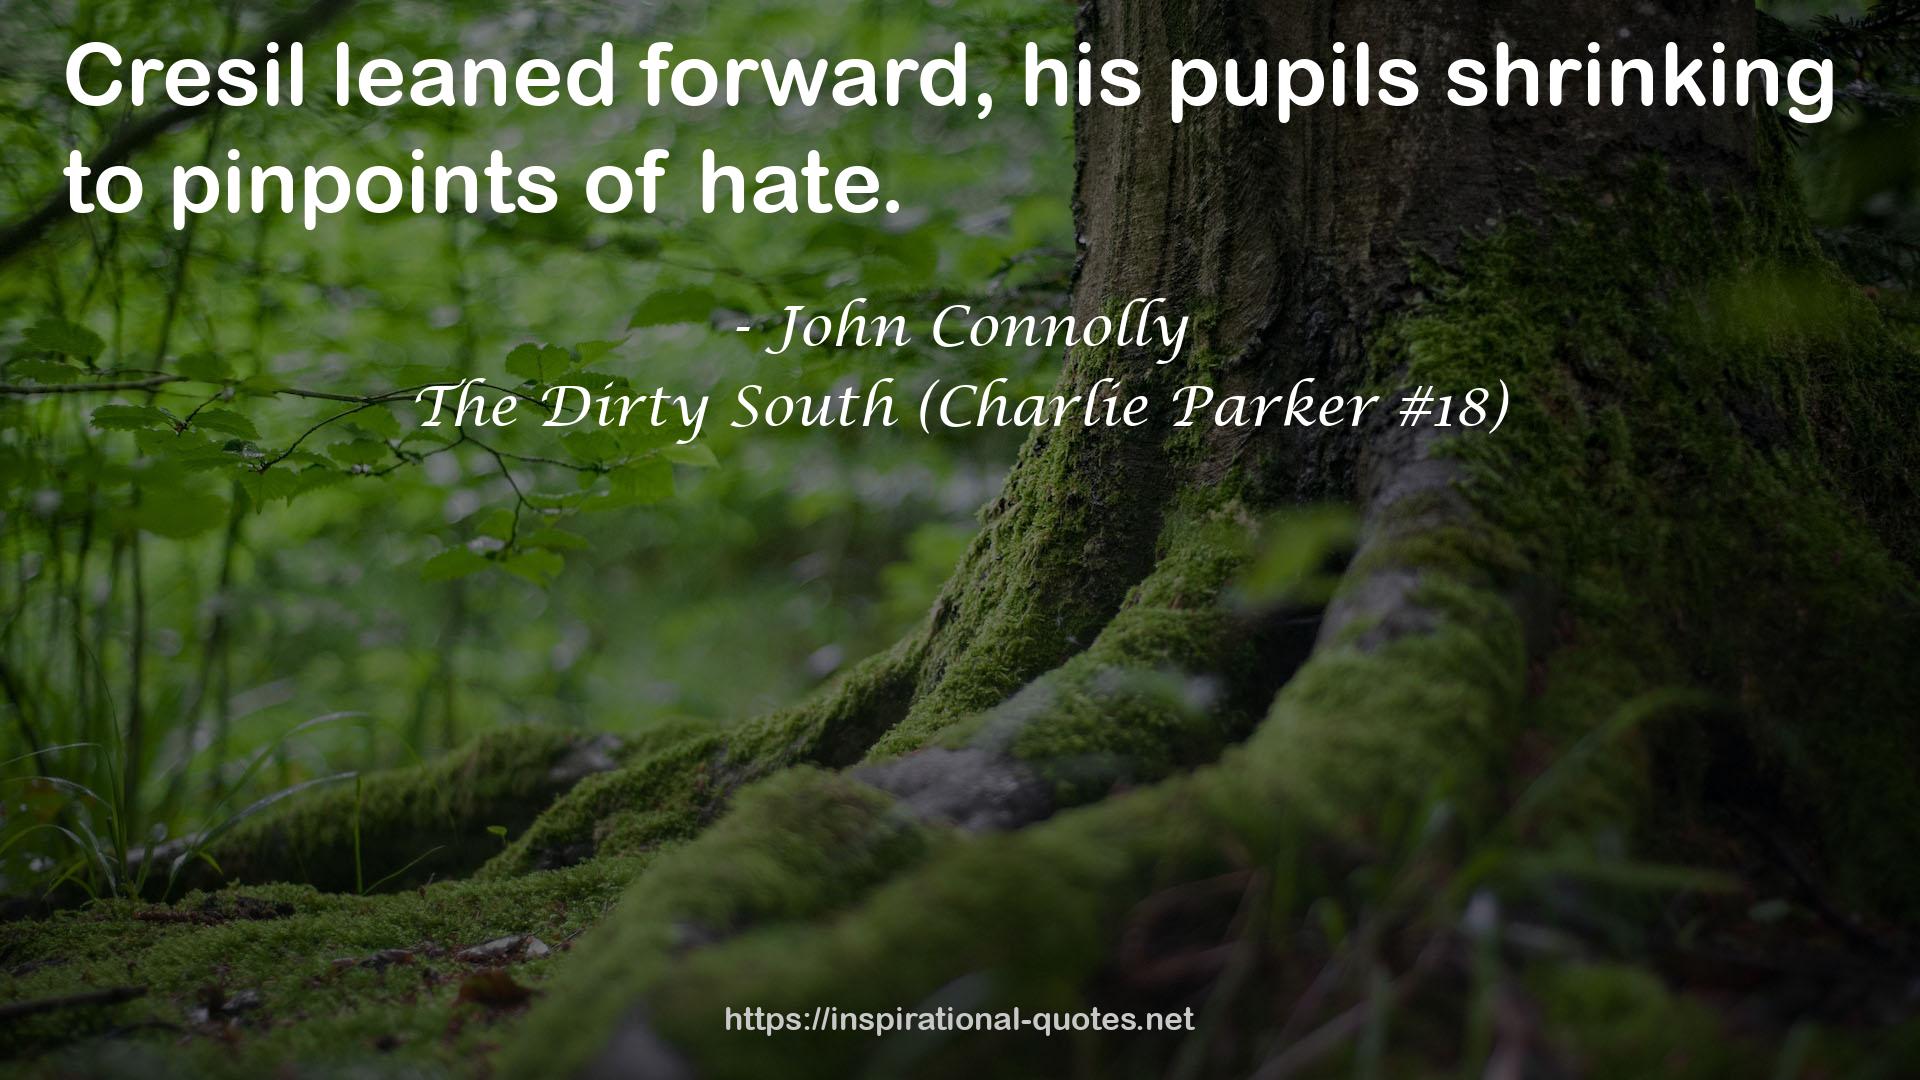 The Dirty South (Charlie Parker #18) QUOTES